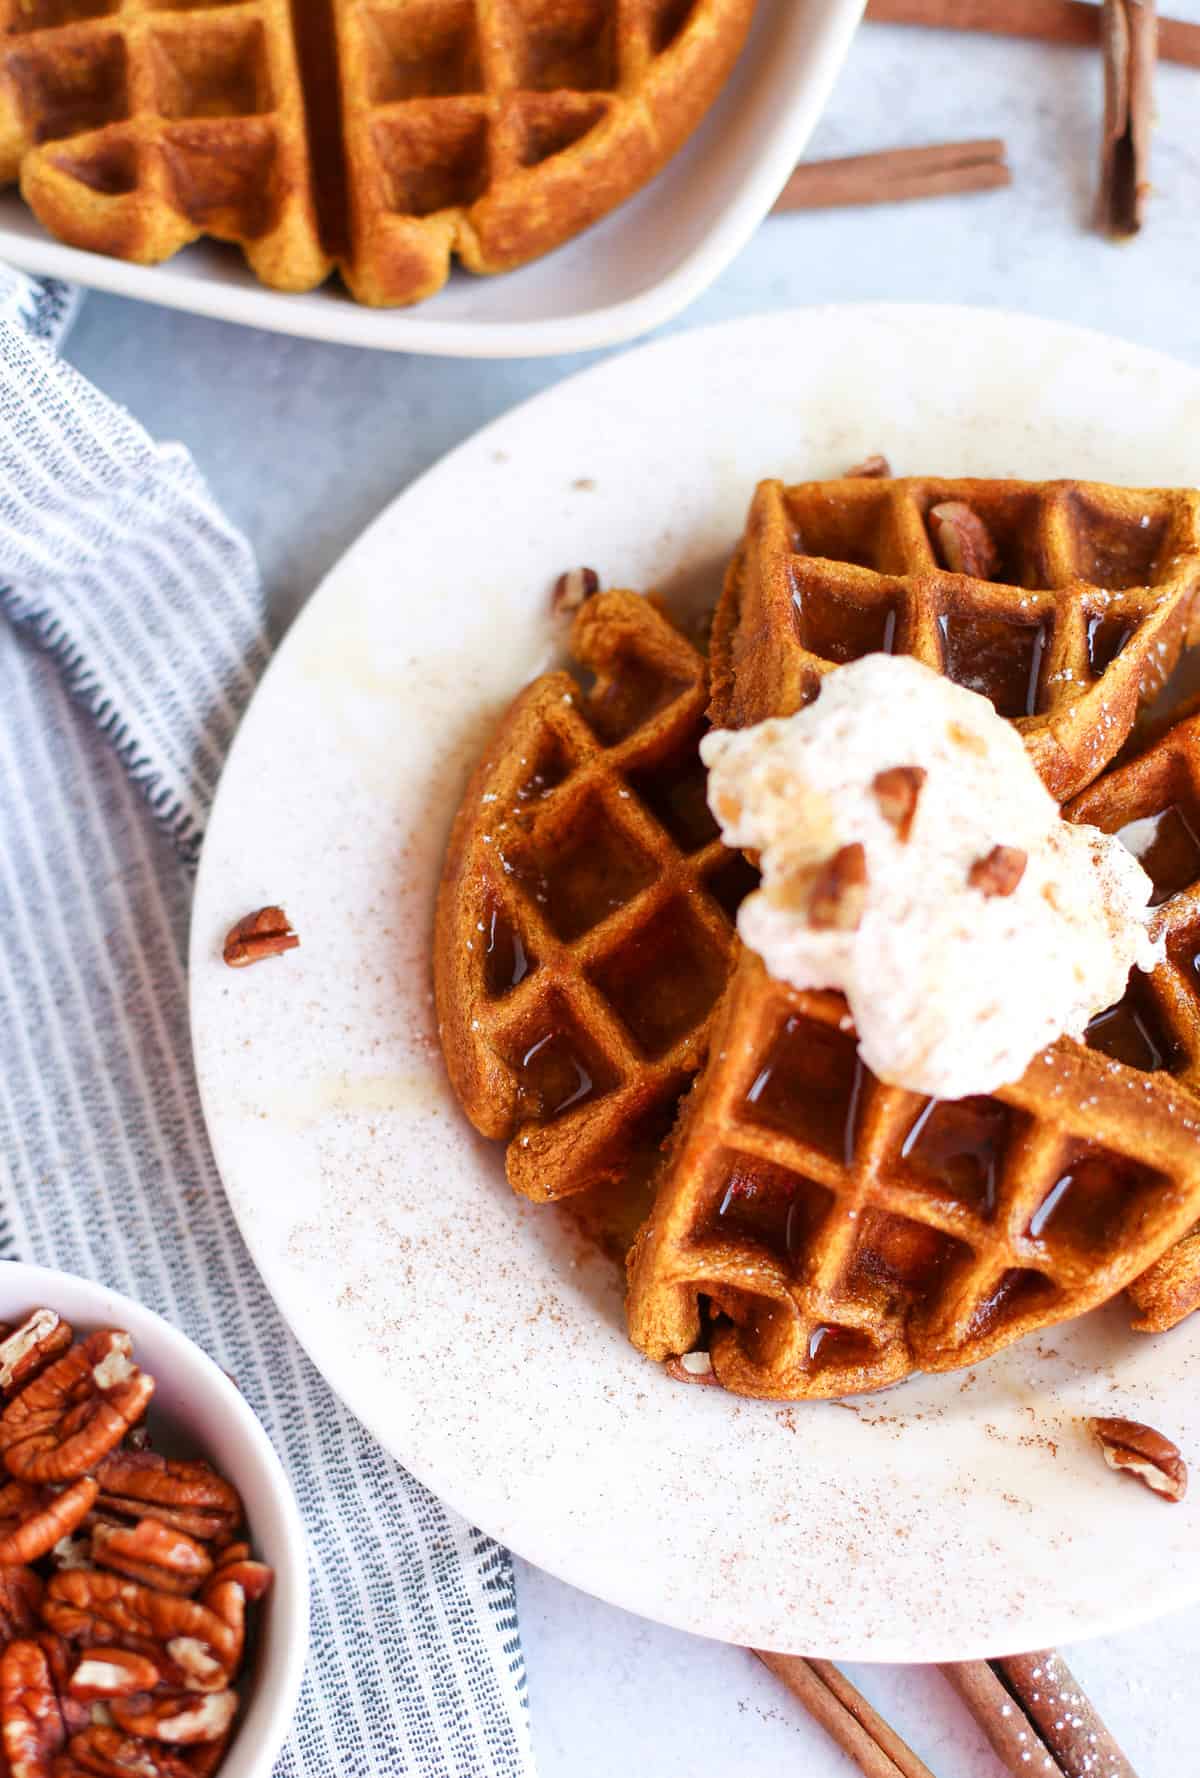 Whole wheat pumpkin waffle on a plate with whipped cream, pecan pieces, and a sprinkle of cinnamon over all of it.